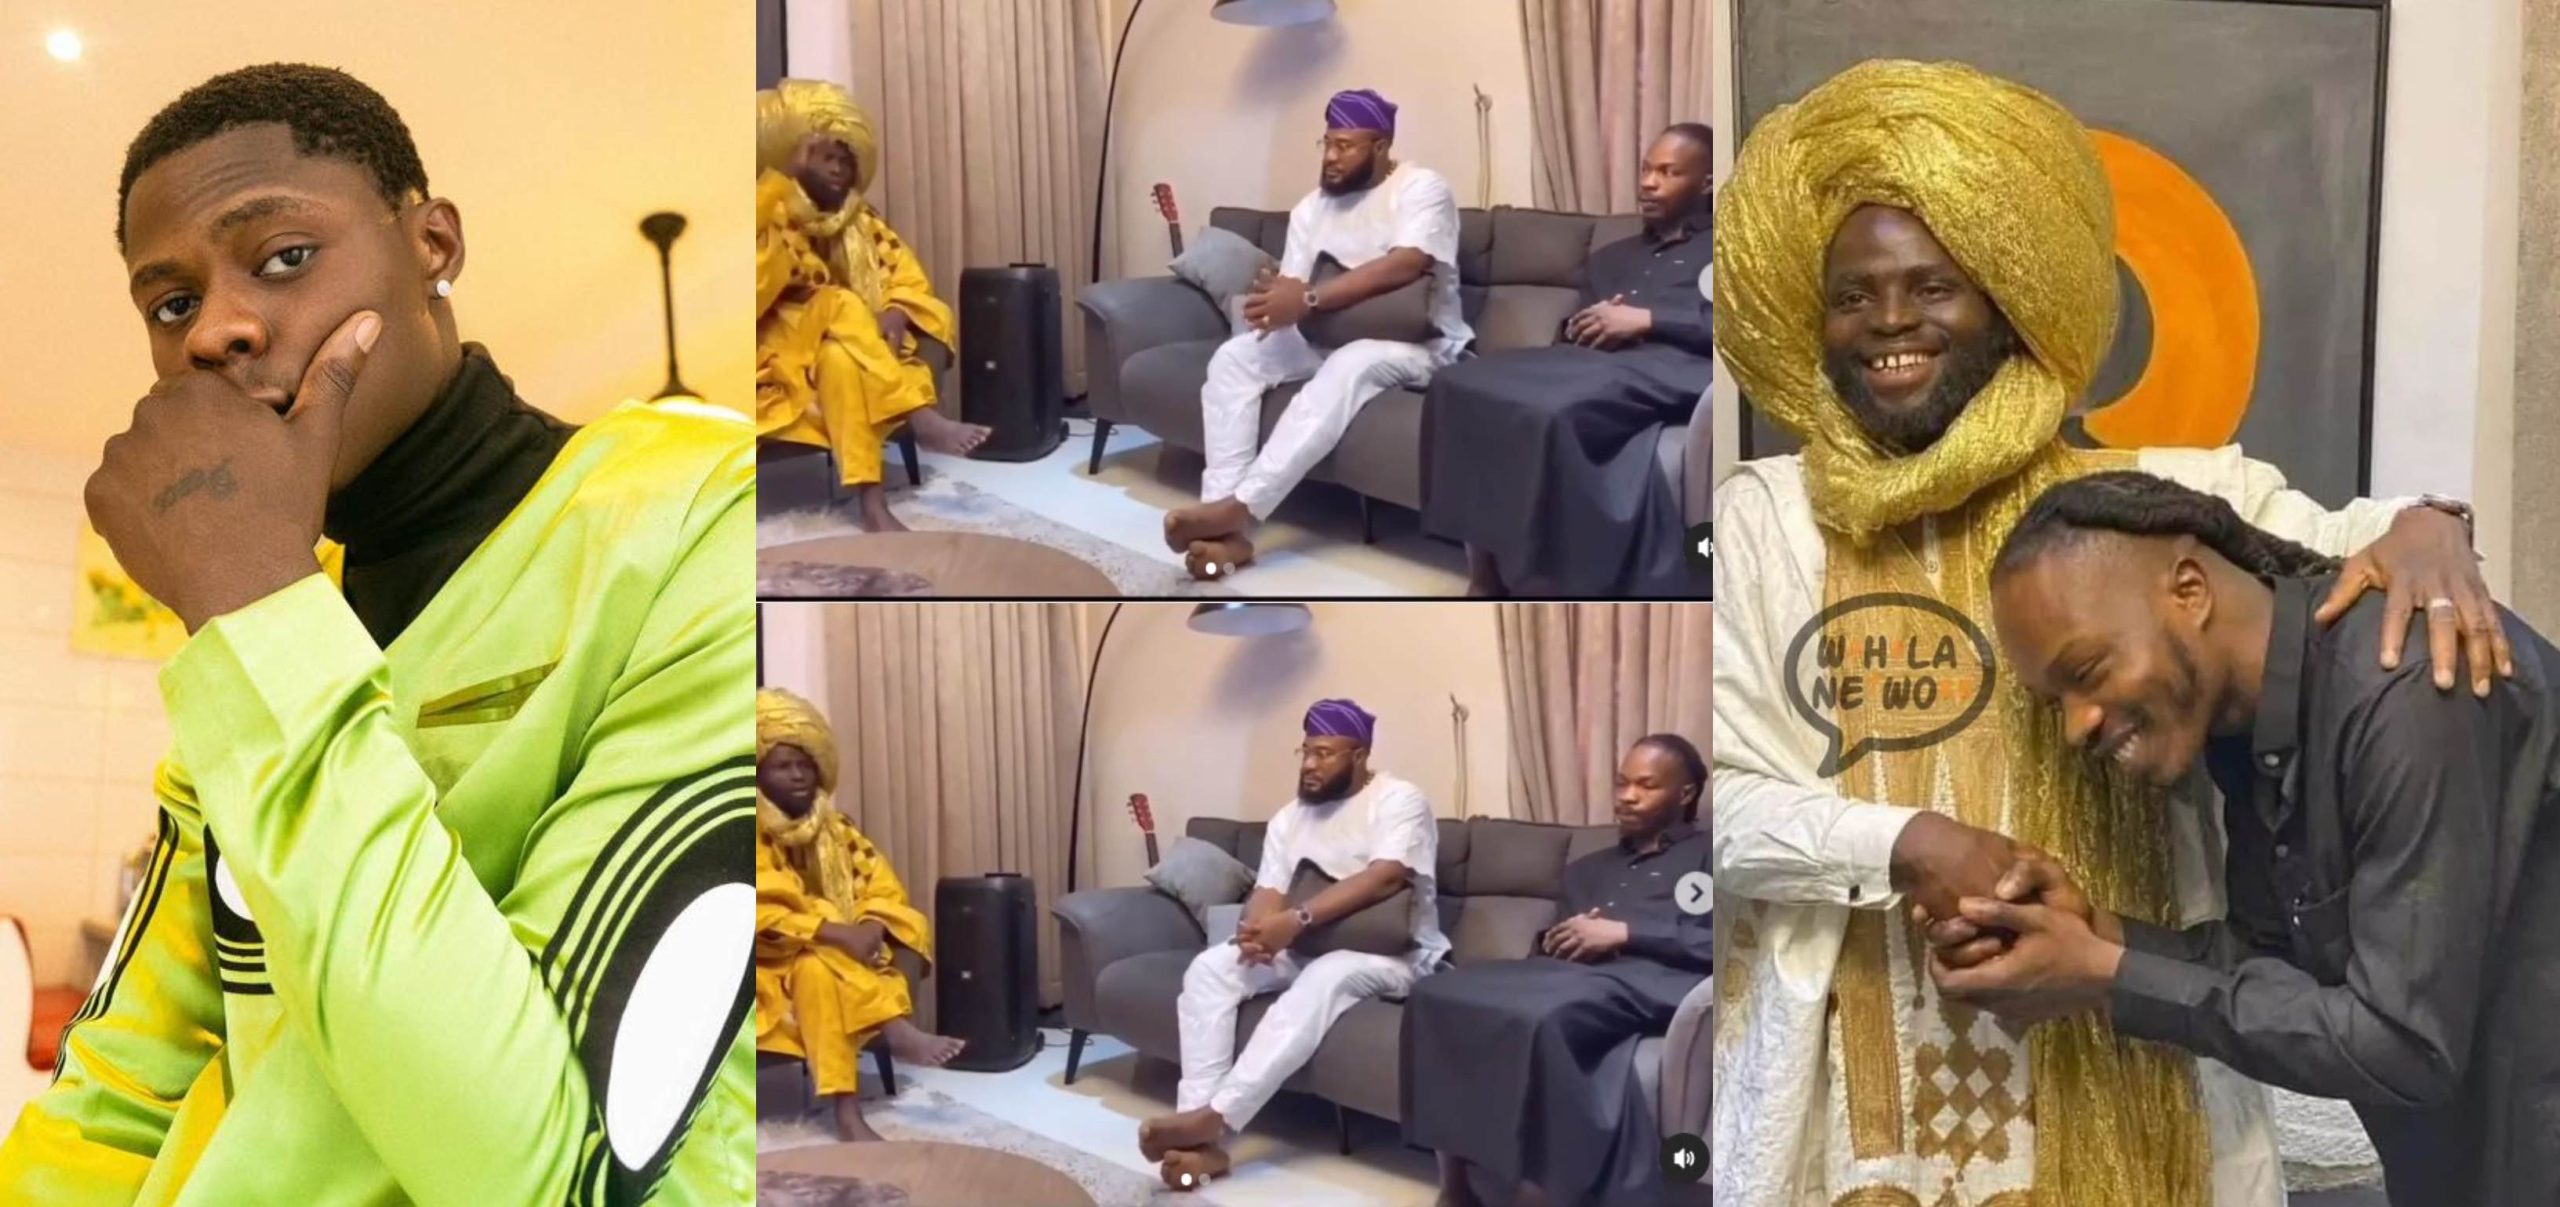 Anybody who knows about Mohbad death will die soon - Moment Islamic cleric tells Naira Marley, Sam Larry and Zinoleeksy